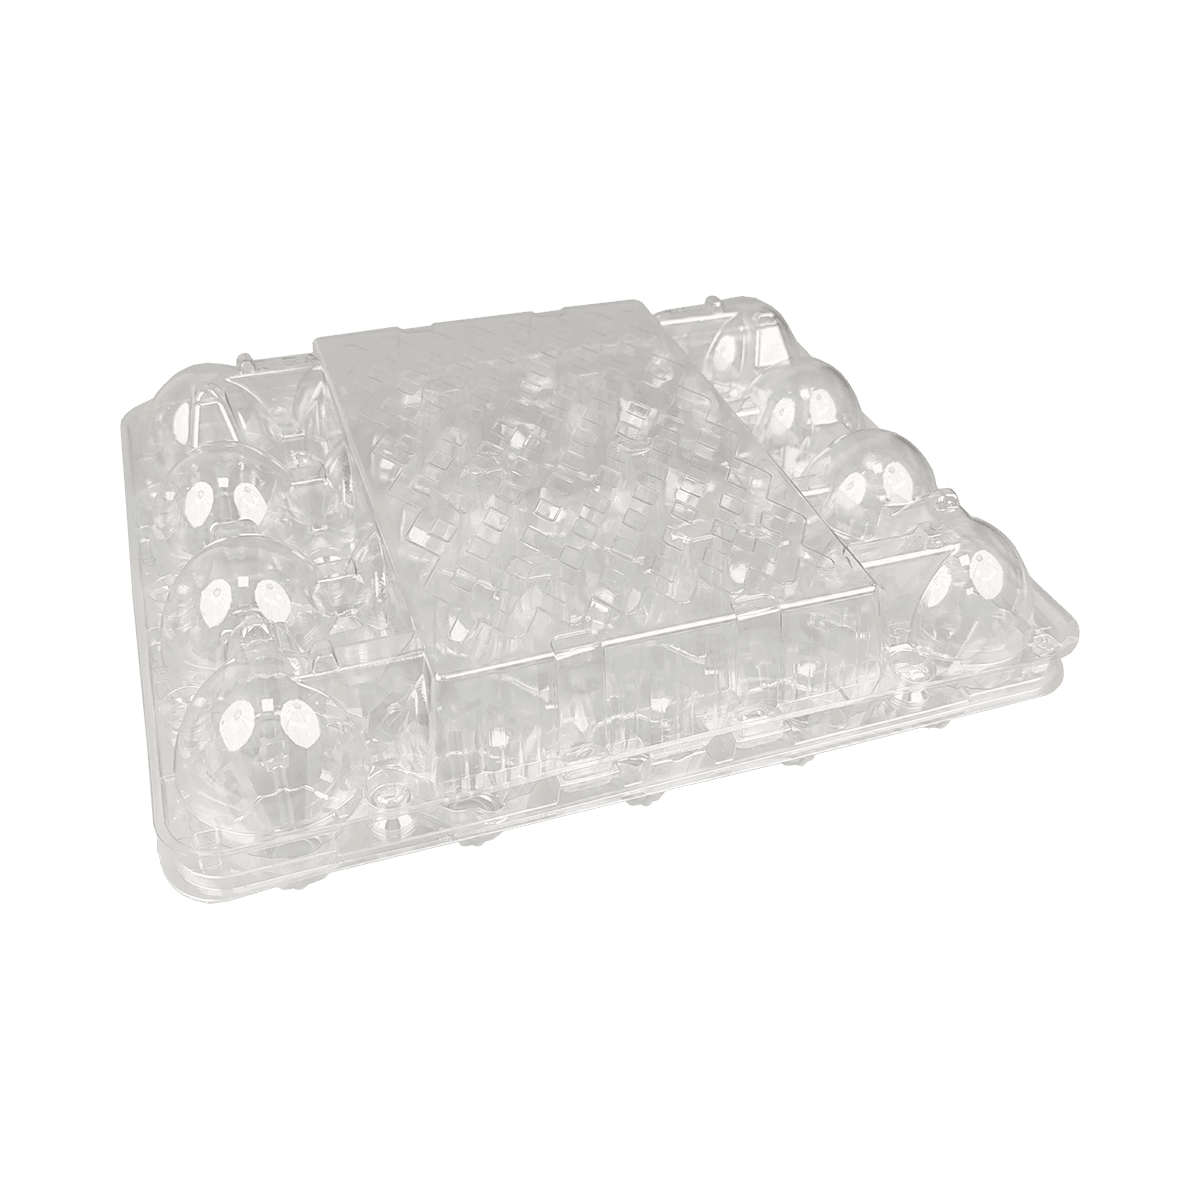 Safe for storage easy to view transparent 20 egg cartons suitable for display